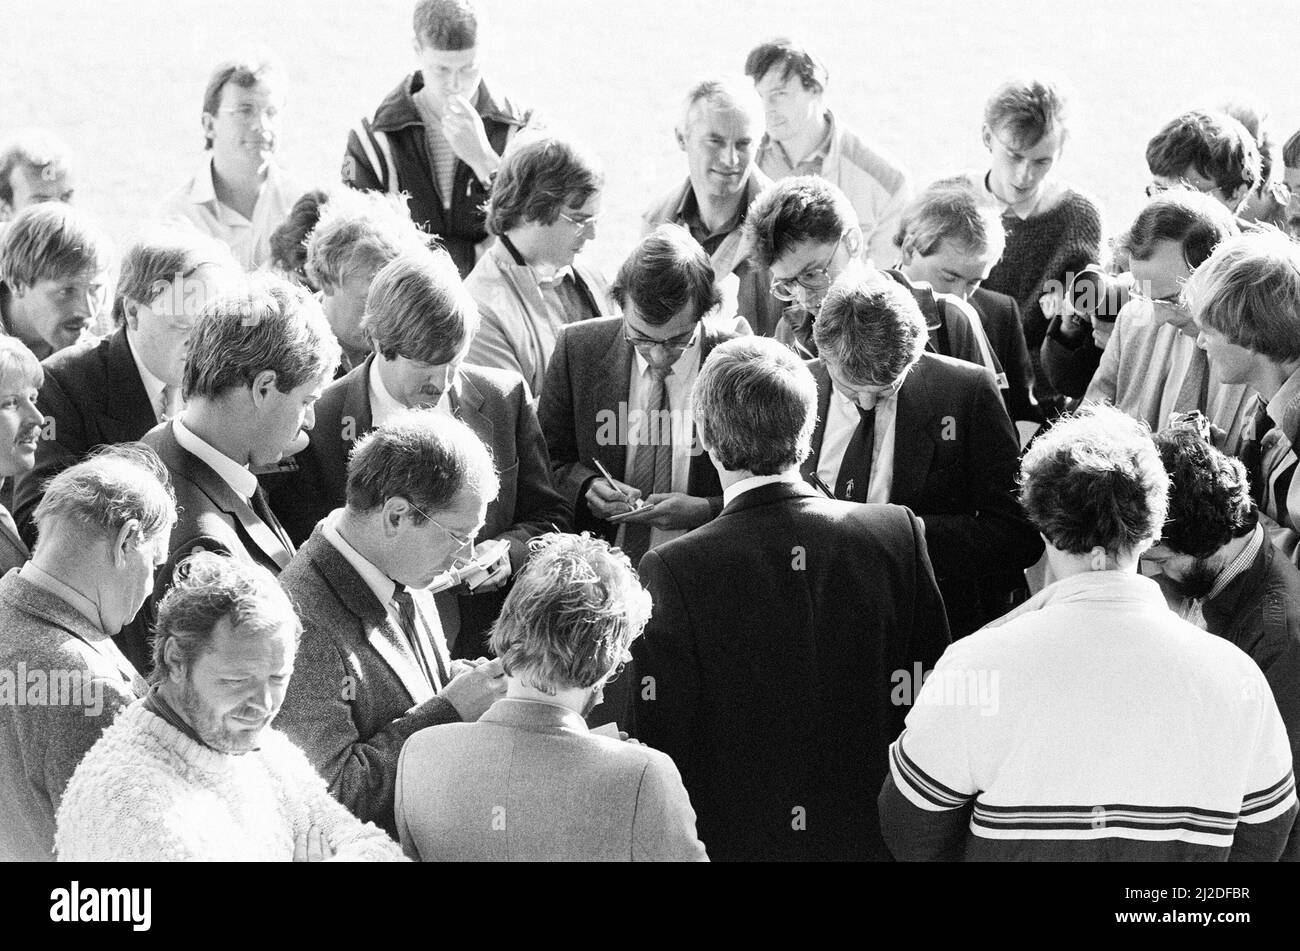 Reading 1-0 Bolton, league division three match at Elm Park, Saturday 5th October 1985. 11 league wins in a row. Media Attention for record equaling team. Stock Photo